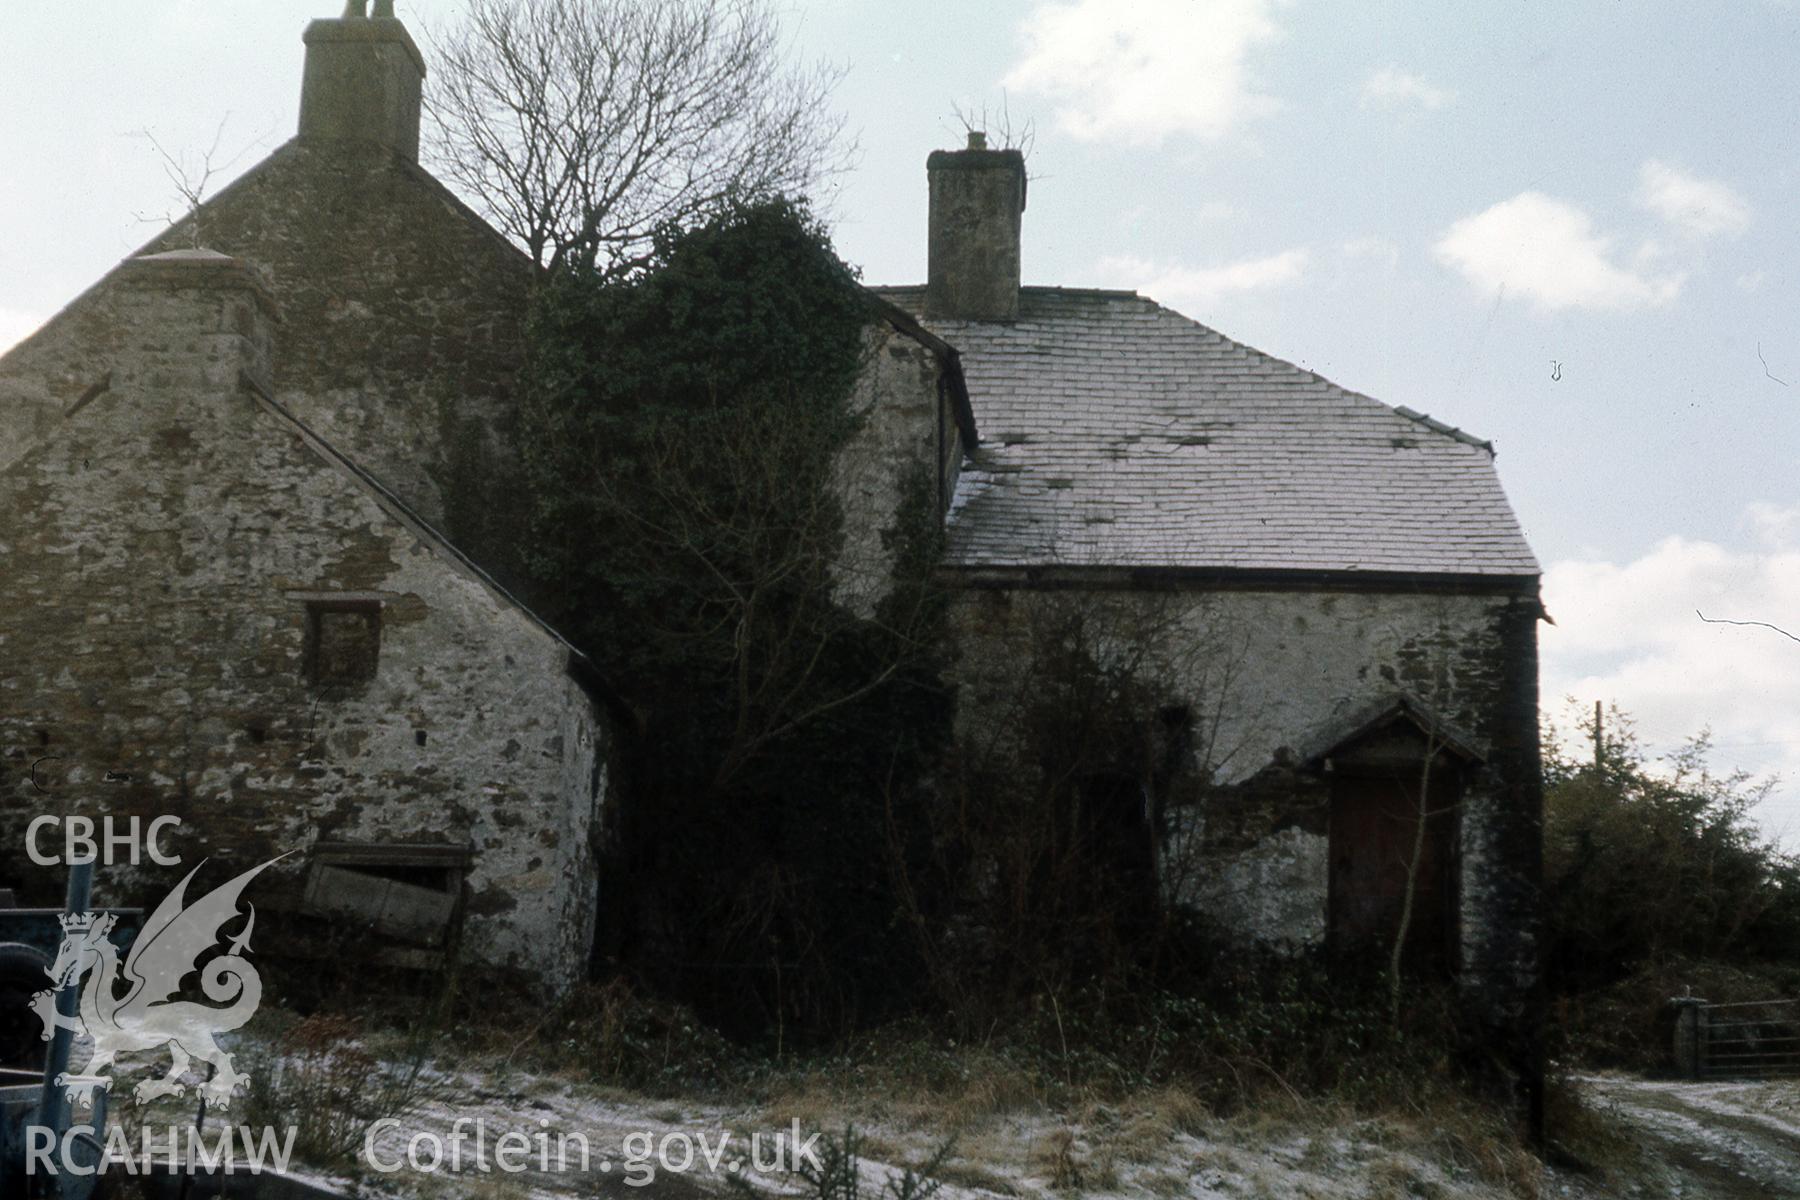 Rear view of Blaenau Mansion, Llandybie, scanned from a photo taken by Dylan Rees, 1978.